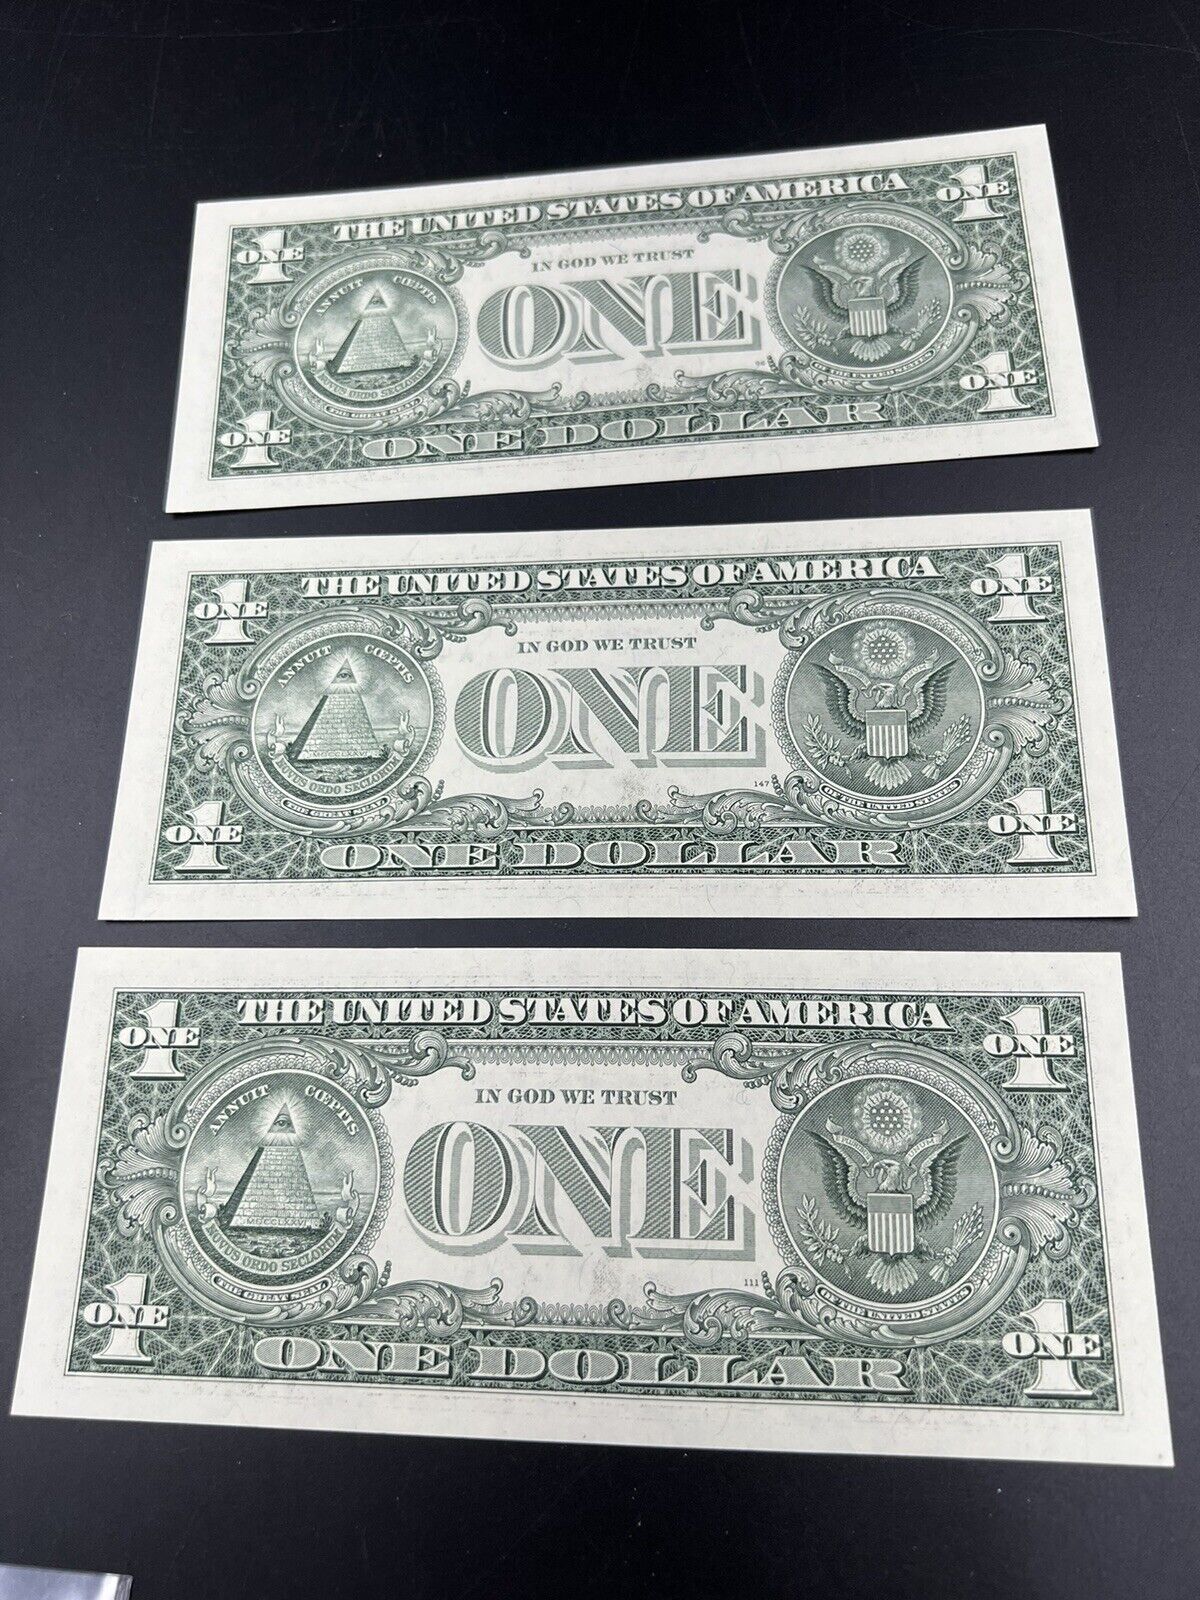 3 Consecutive 2006 $1 FRN SIXTUPLE REPEATER Serial Numbers 44444401-3 CH UNC